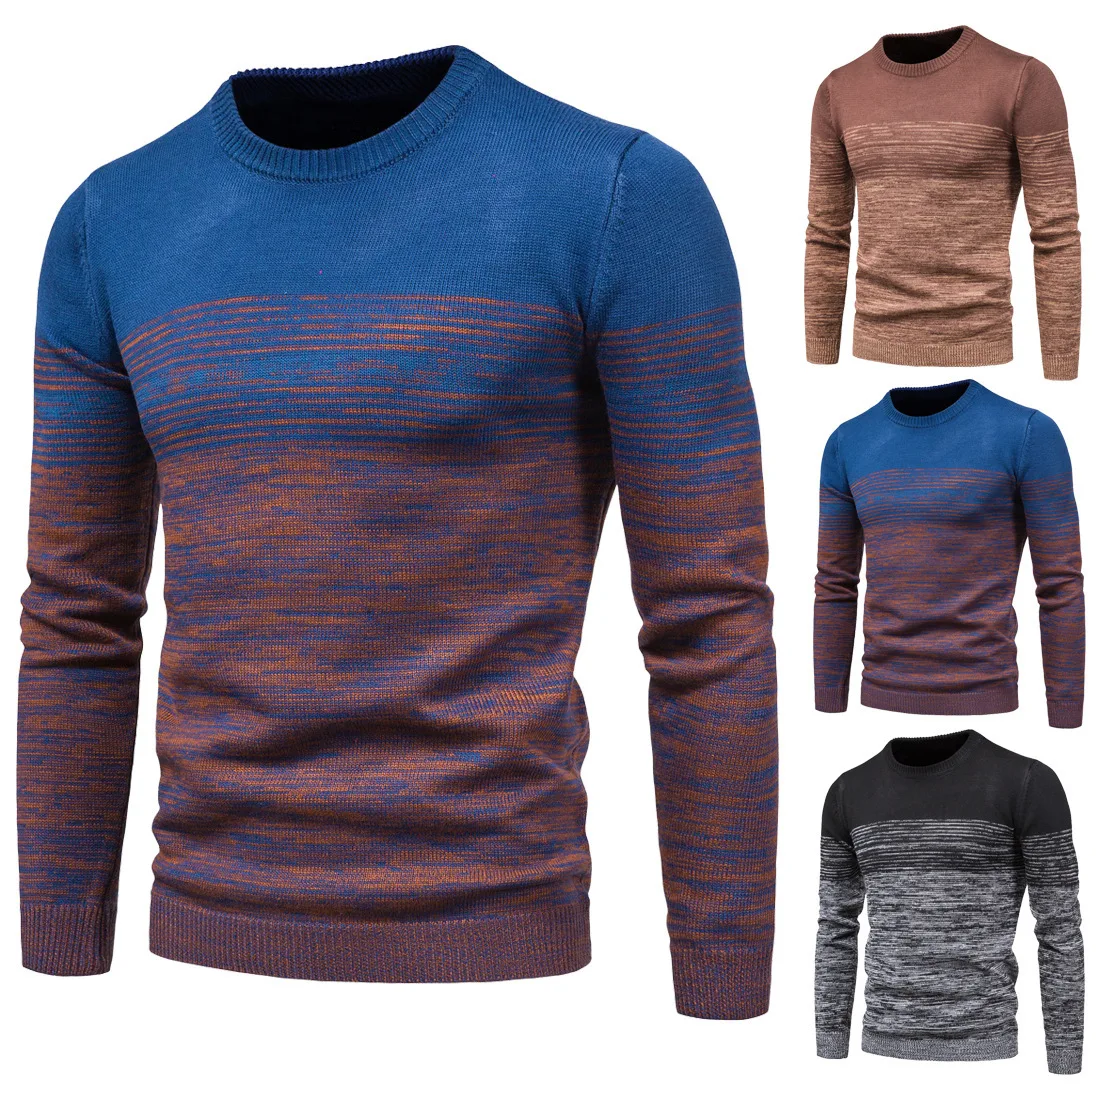 New Autumn Men's Knitwear Hedging Round Neck Variegated Contrast Fashion Base Sweater Male Tops